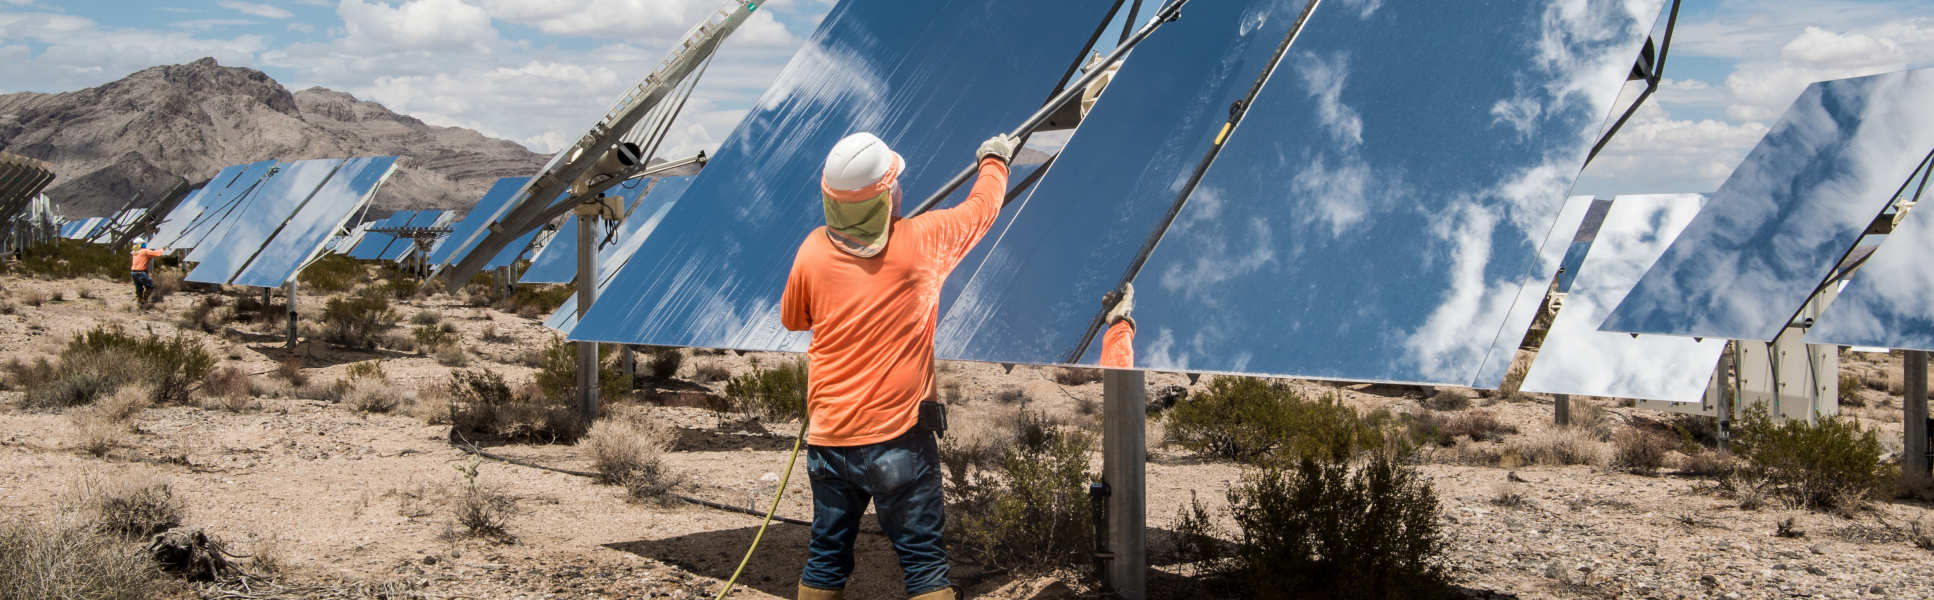 man cleaning big solar panels installed on the floor in arid conditions